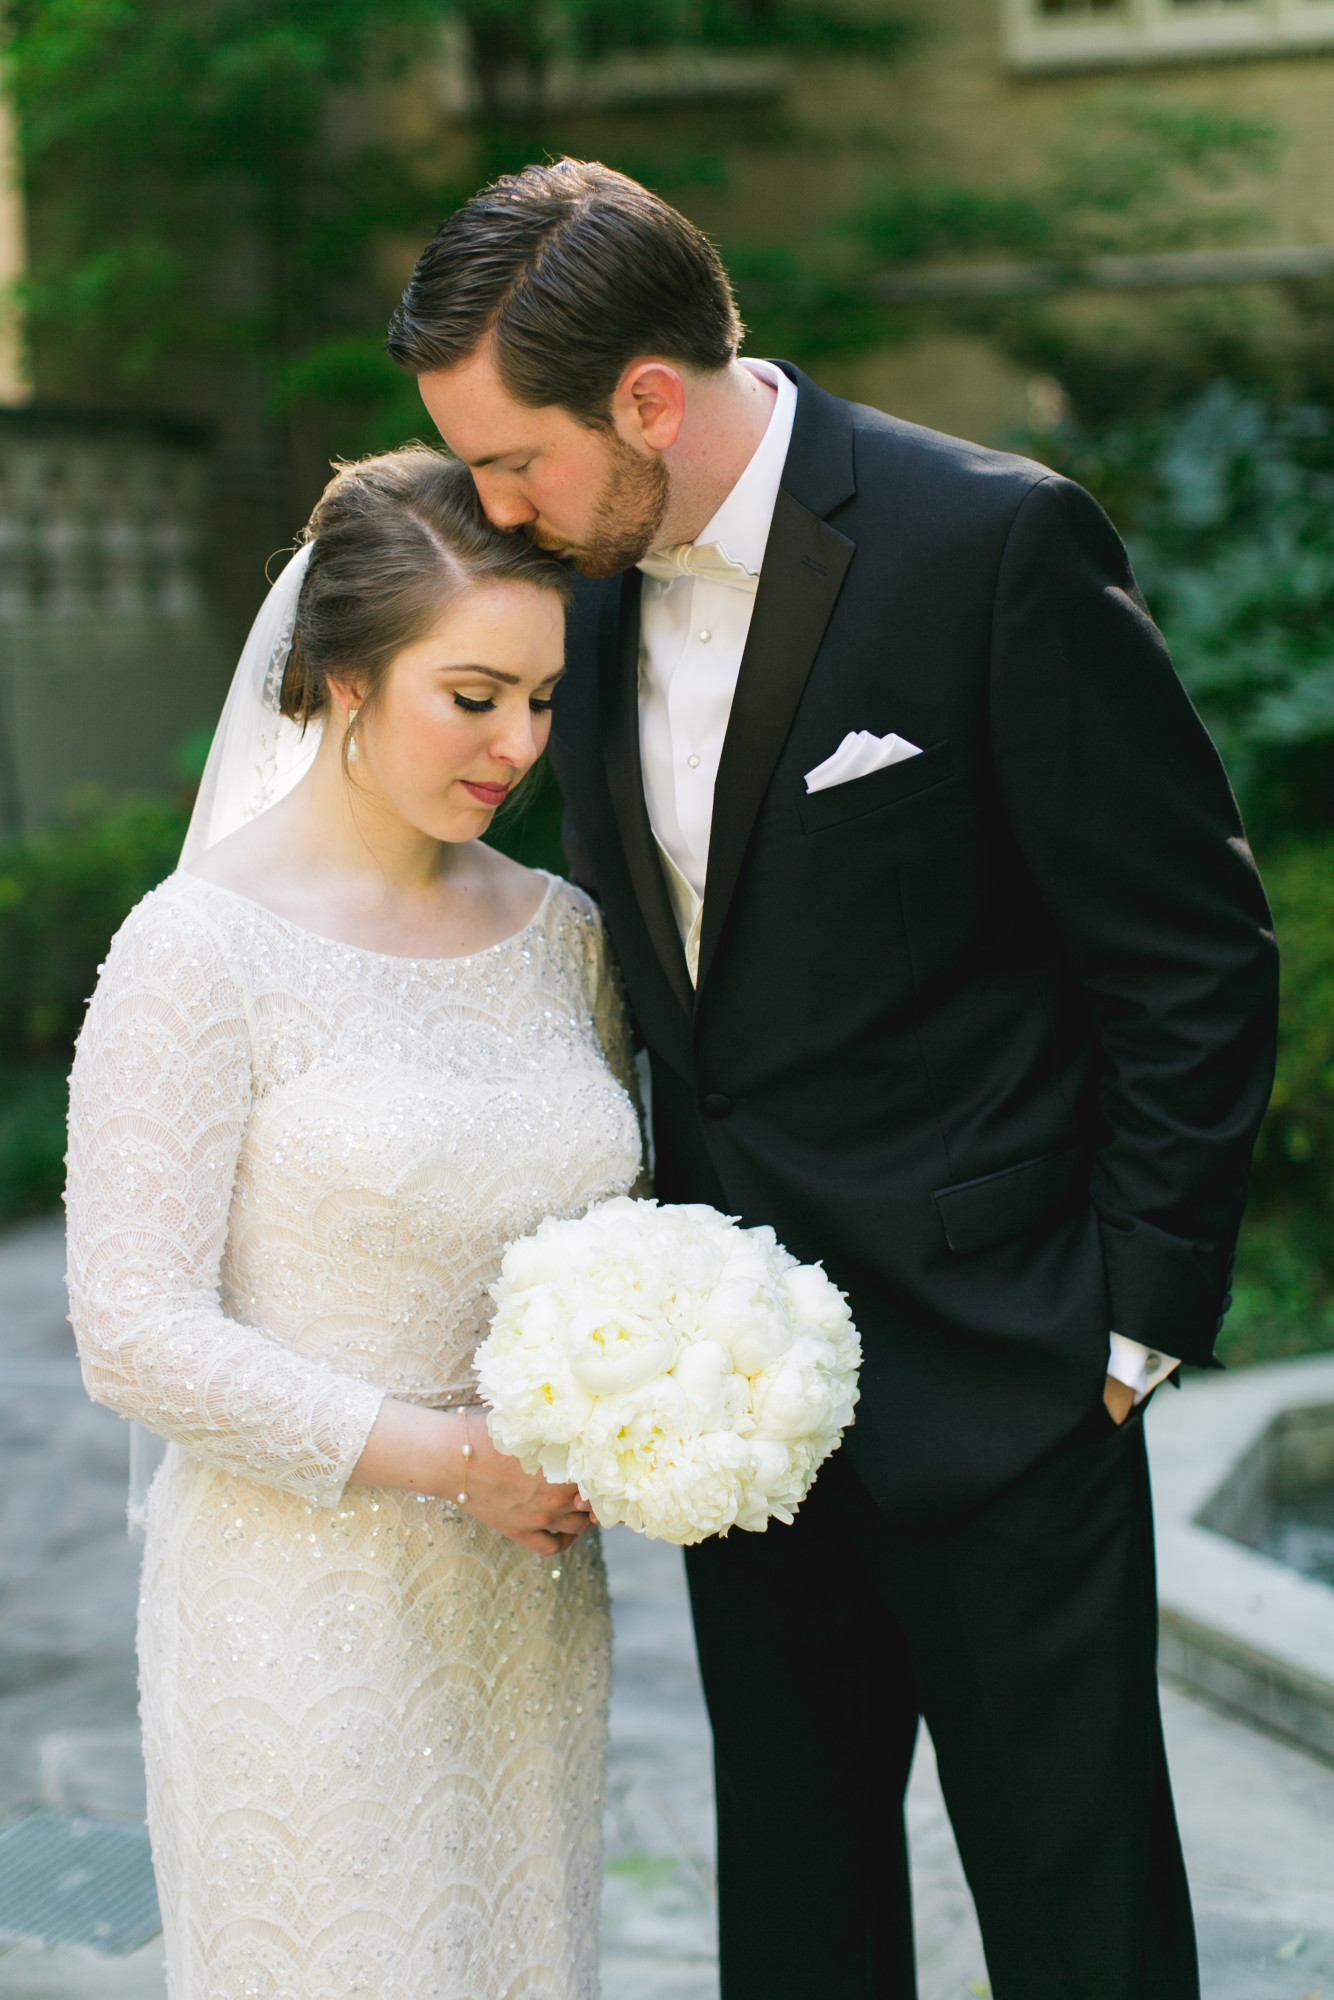 An Ivory + White Downtown Dallas Wedding - The Overwhelmed Bride Wedding Blog